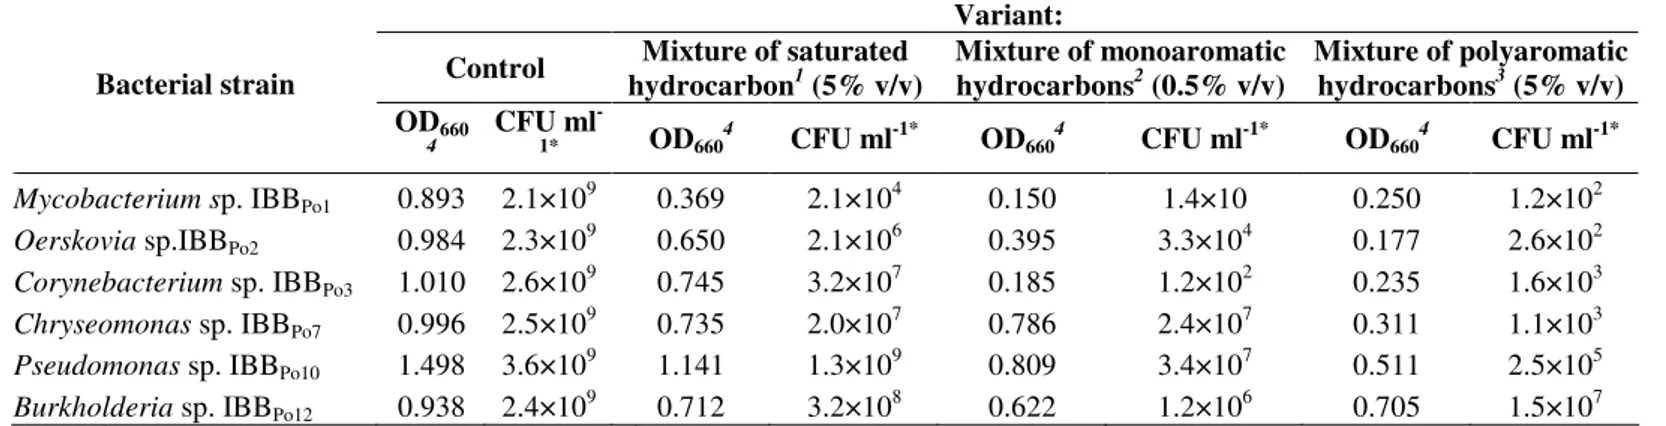 Table  3.  The  cell  viability  modifications  of  Gram-positive  and  Gram-negative  bacteria in  the  presence  of  mixture  of  saturated,  monoaromatic and polyaromatic hydrocarbons